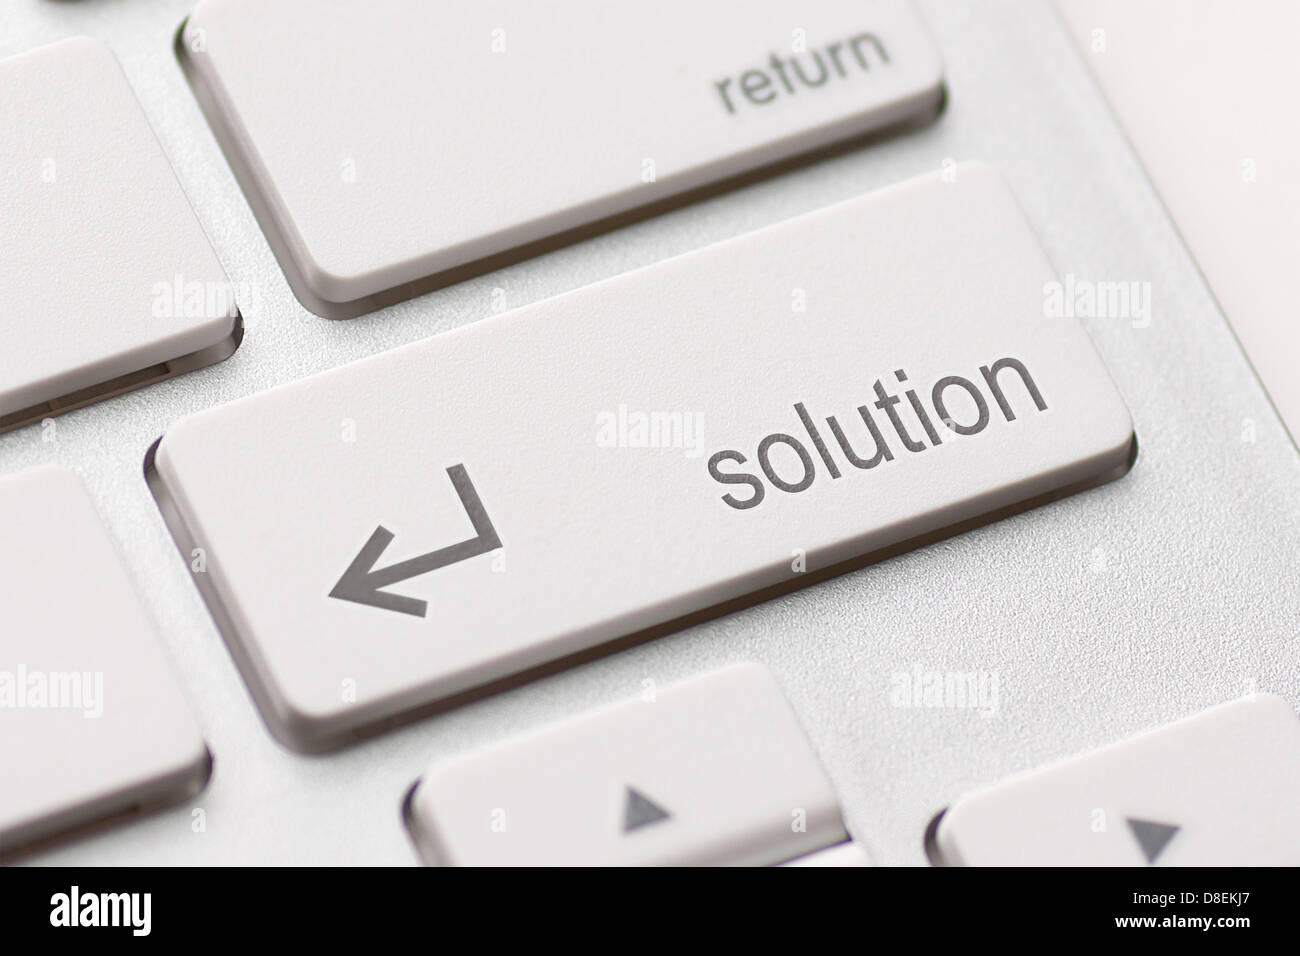 A computers solution key on white keyboard Stock Photo